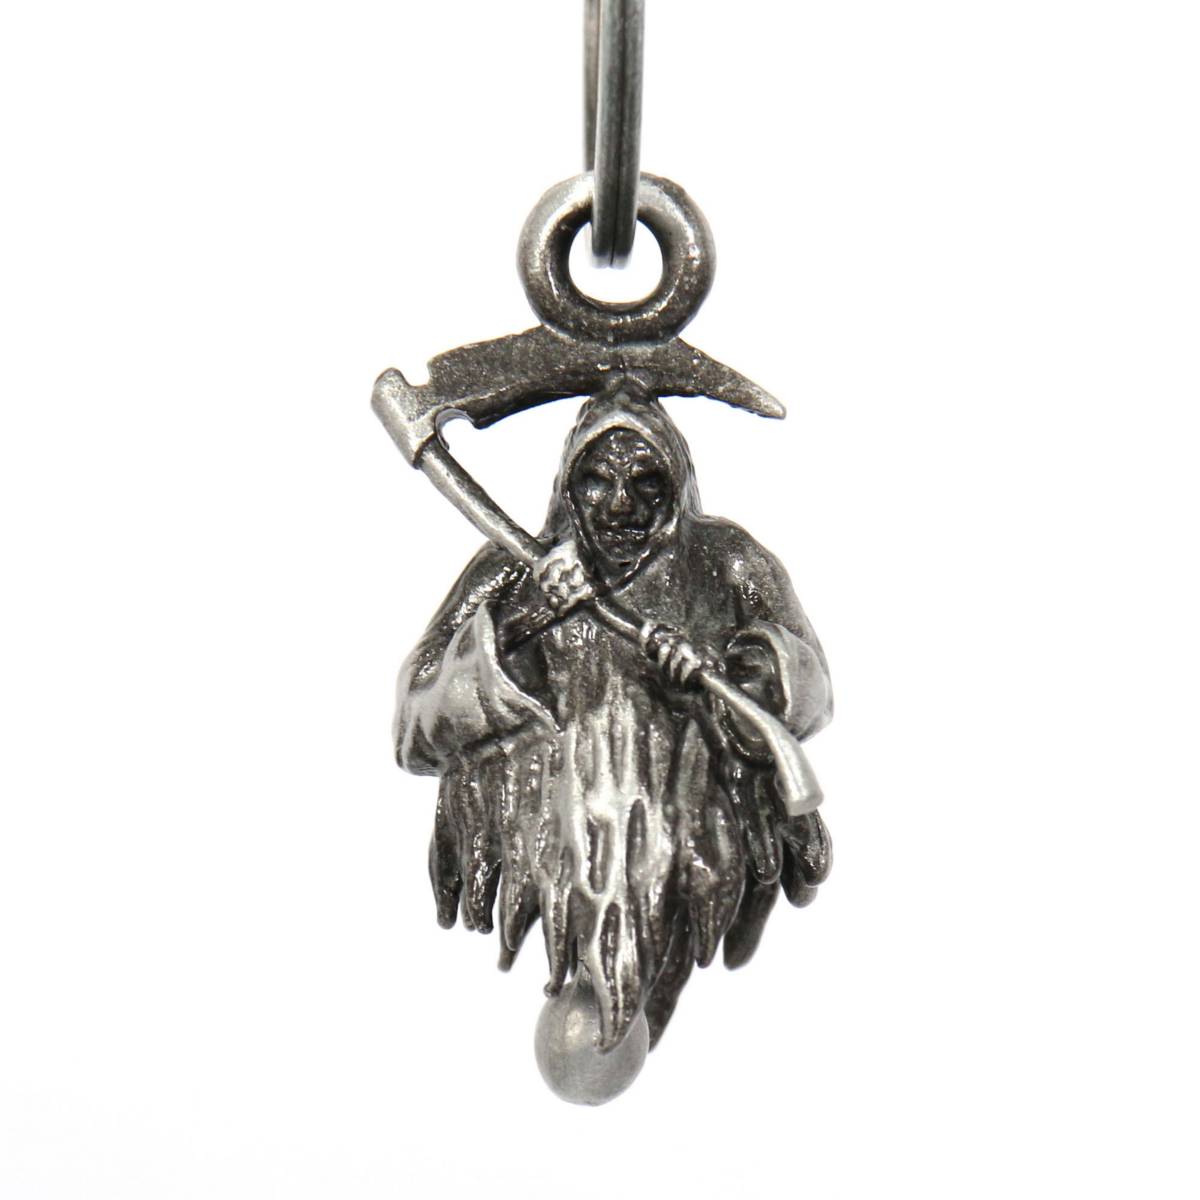 Milwaukee Leather MLB9050 'Grim Reaper' Motorcycle Good Luck Bell | Key Chain Accessory for Bikers